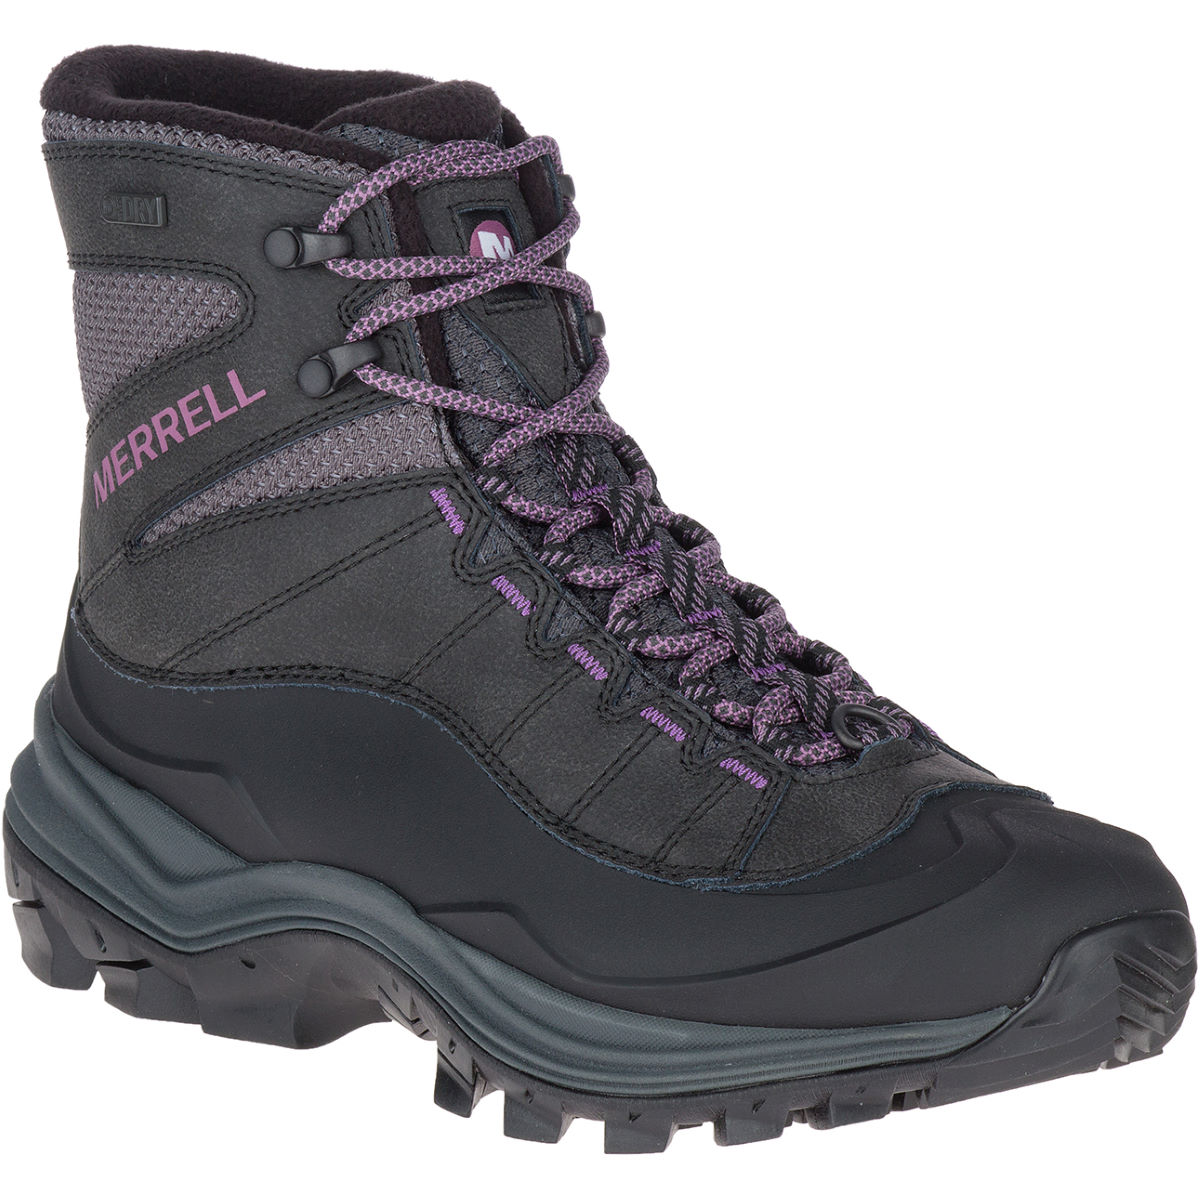 Merrell Women's Thermo Chill 6 Shell Waterproof Shoes - Botas y botines